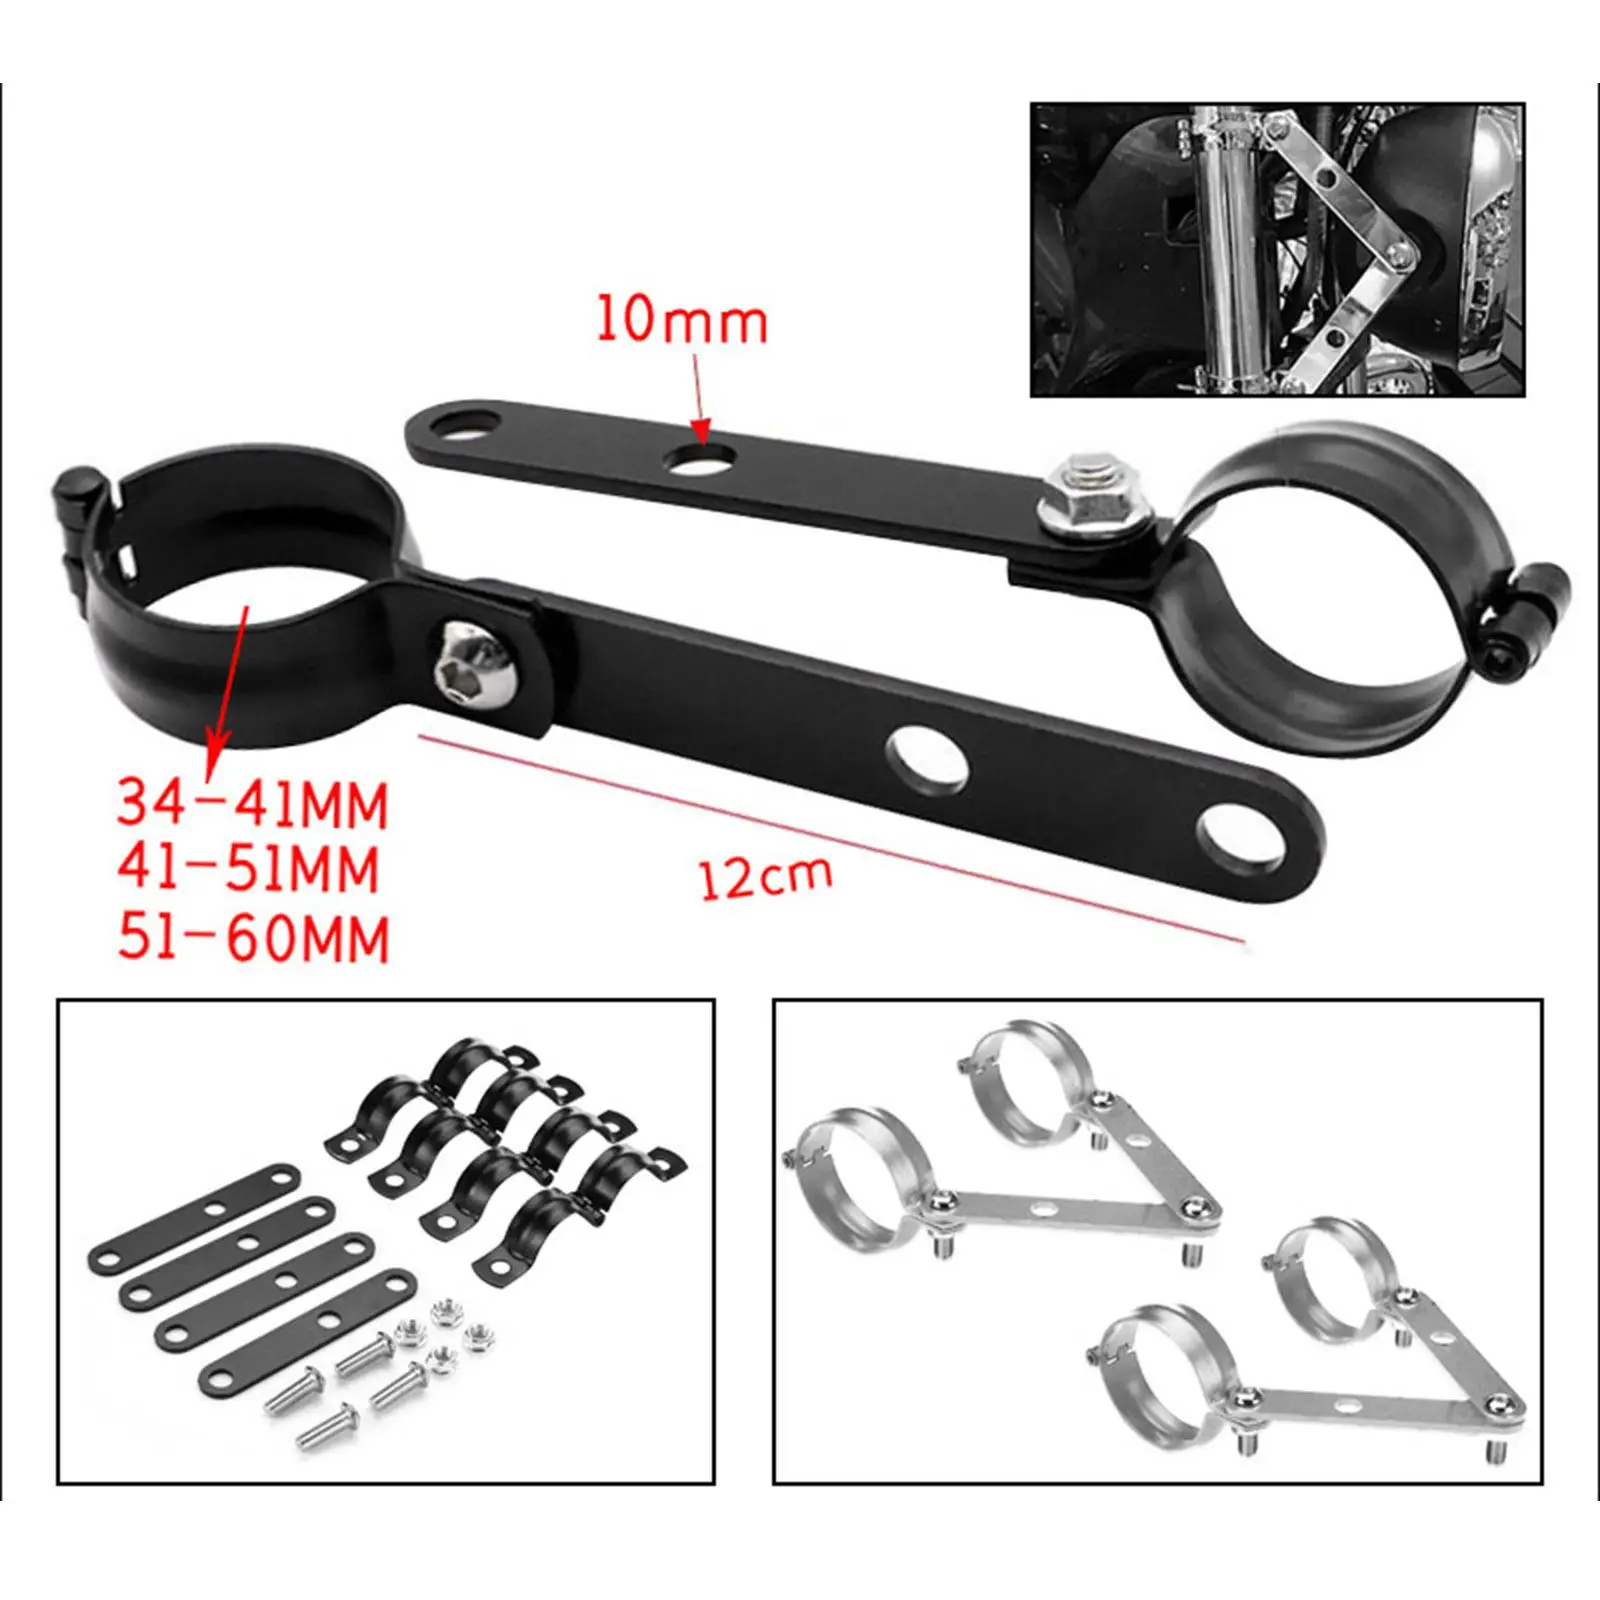 Sturdy Headlight Mount Bracket 34mm-41mm Fork for Harley Cruise Crown Prince 883 Easy Installation Replacement Accessories